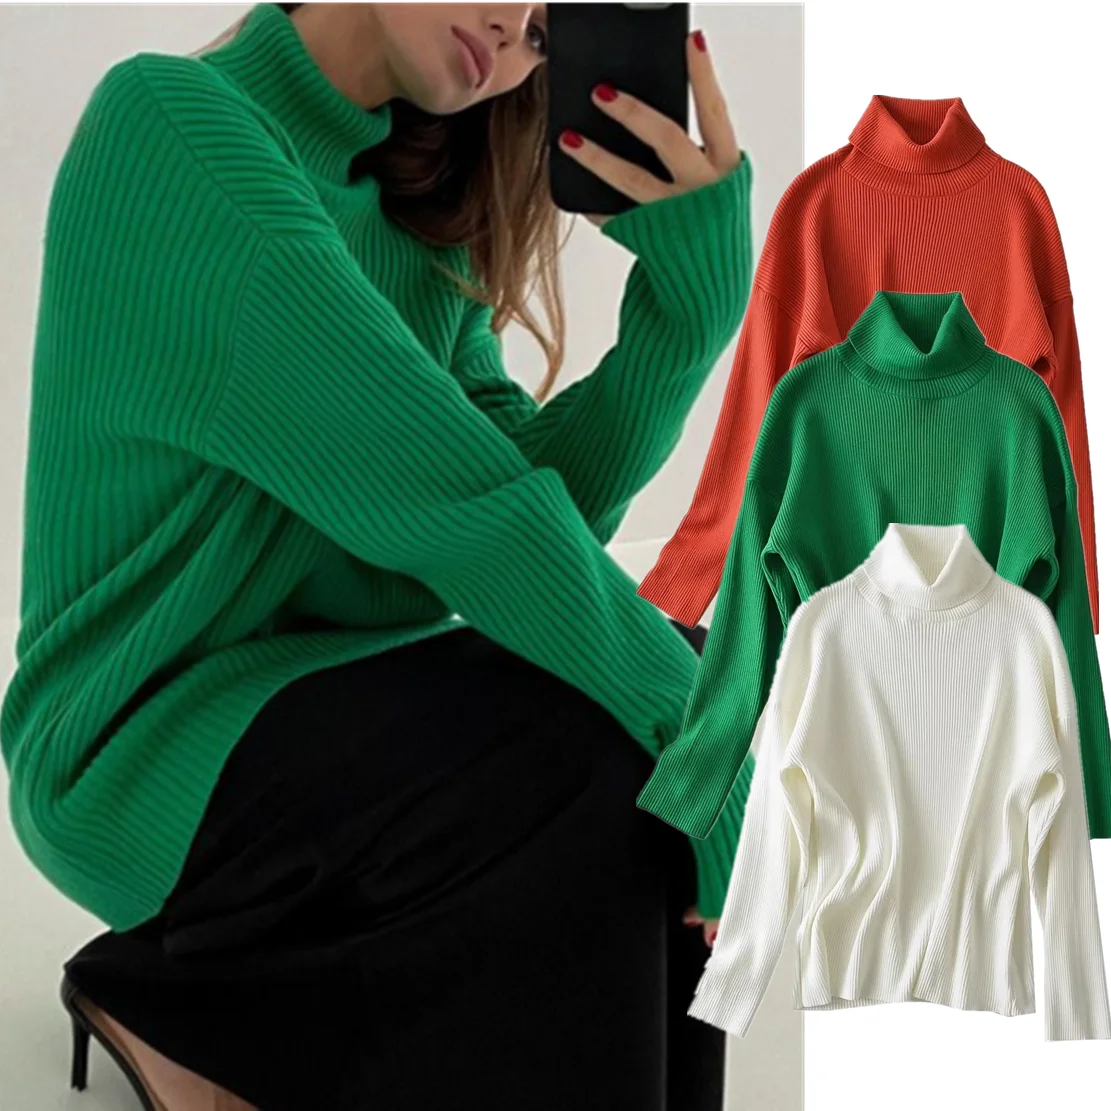 

Maxdutti Ins Fashion Blogger Vintage Turtleneck Solid Tops Loose Knitwear Rib Winter Sweaters Women Pullovers